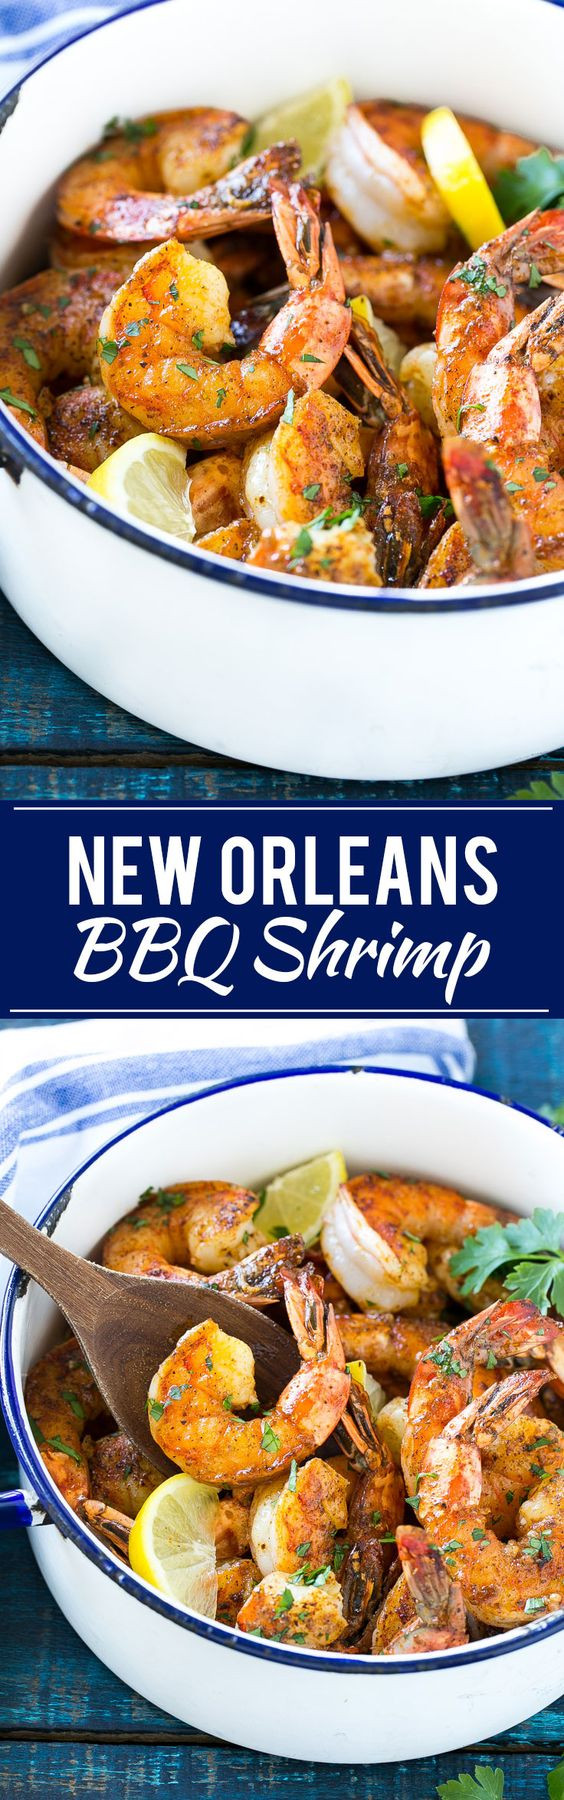 New Orleans Bbq Shrimp And Grits
 Pinterest • The world’s catalog of ideas